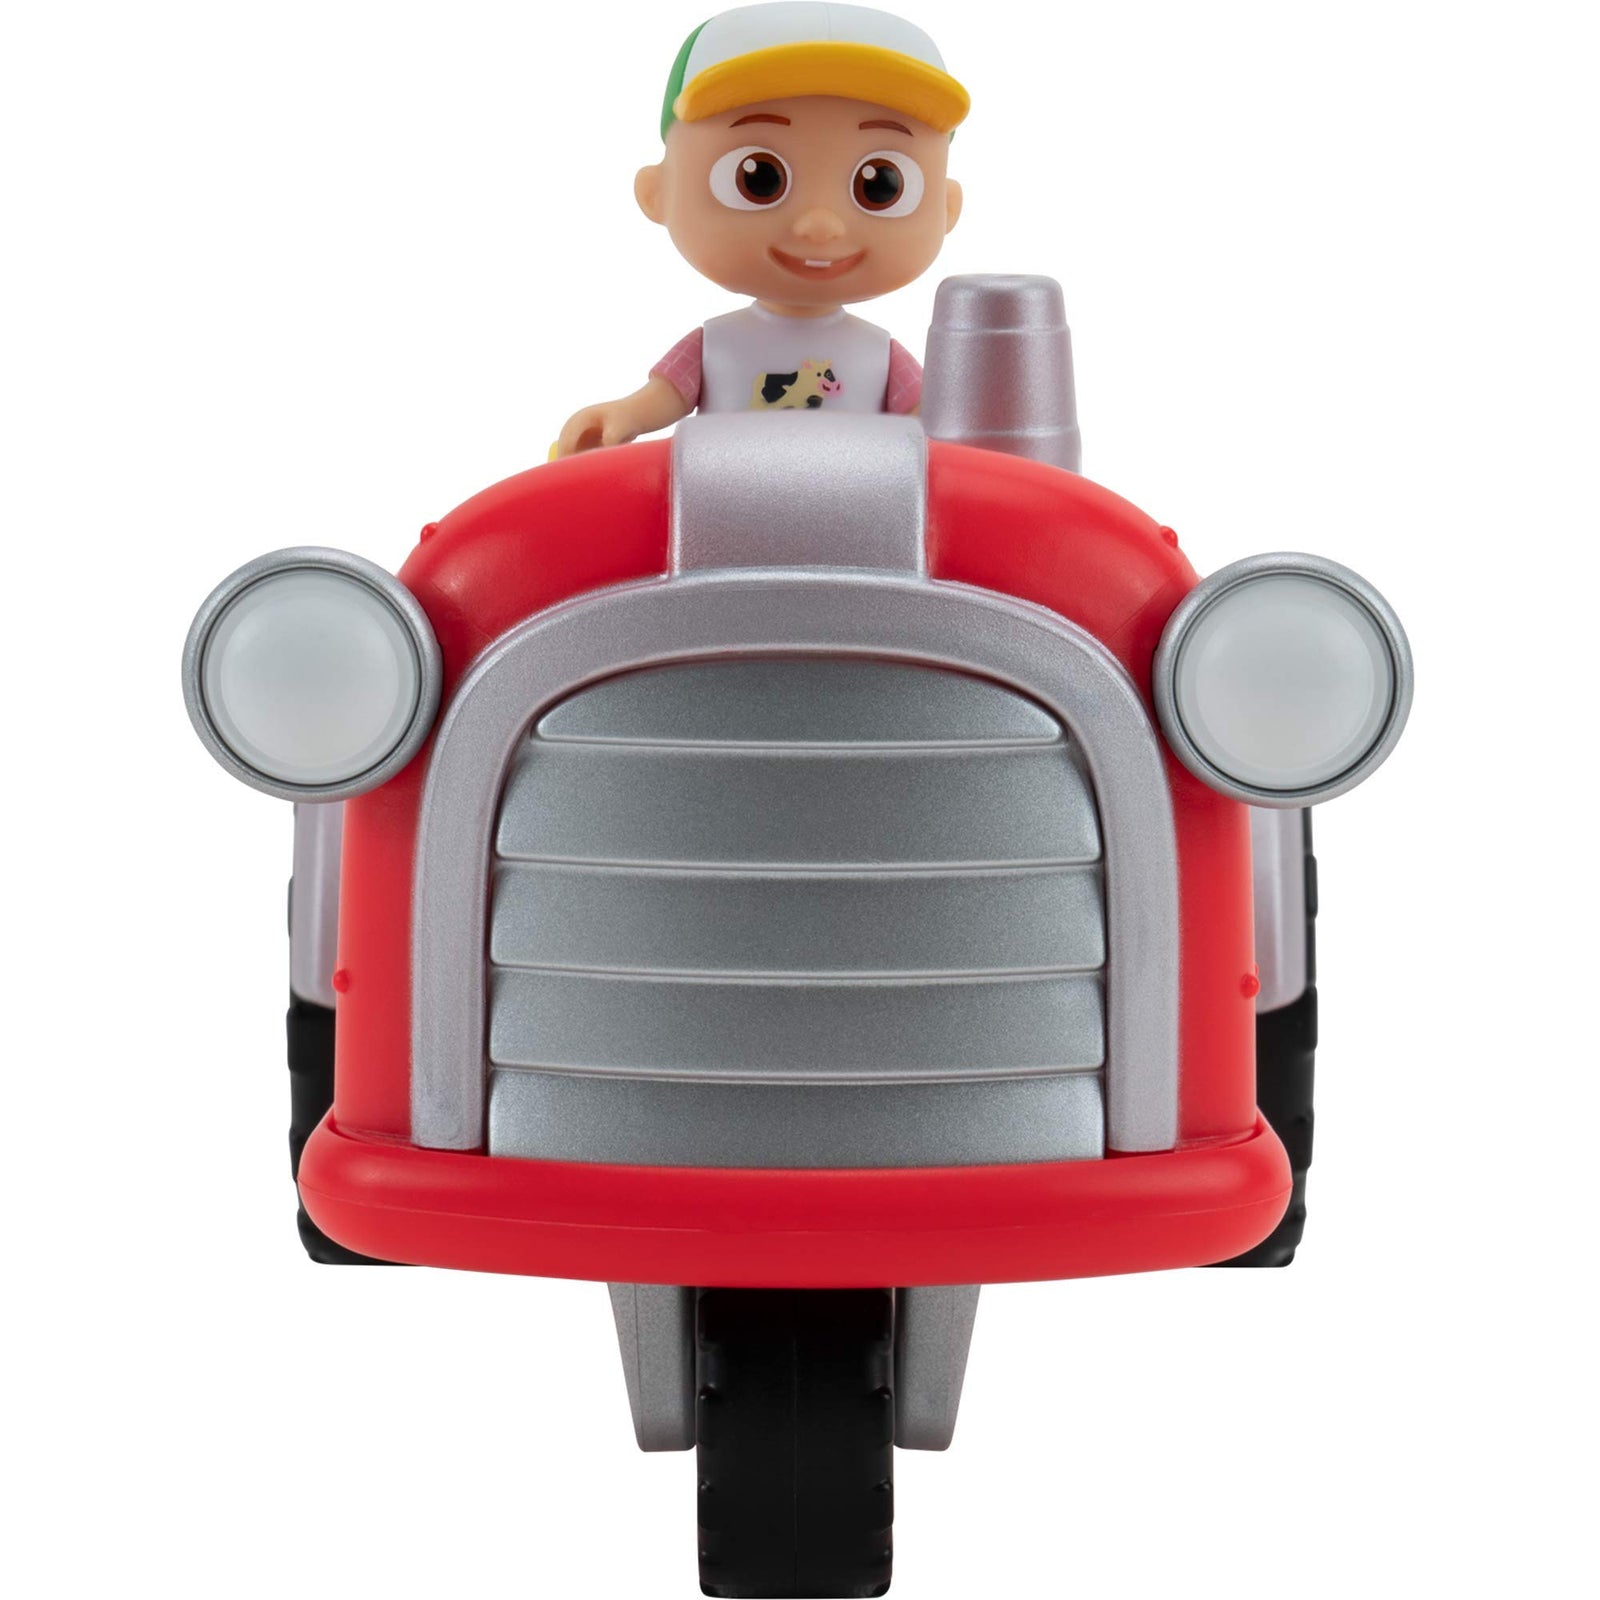 CoComelon Official Musical Tractor w/ Sounds & Exclusive 3-inch Farm JJ Toy, Play a Clip of “Old Macdonald” Song Plus More Sounds and Phrases